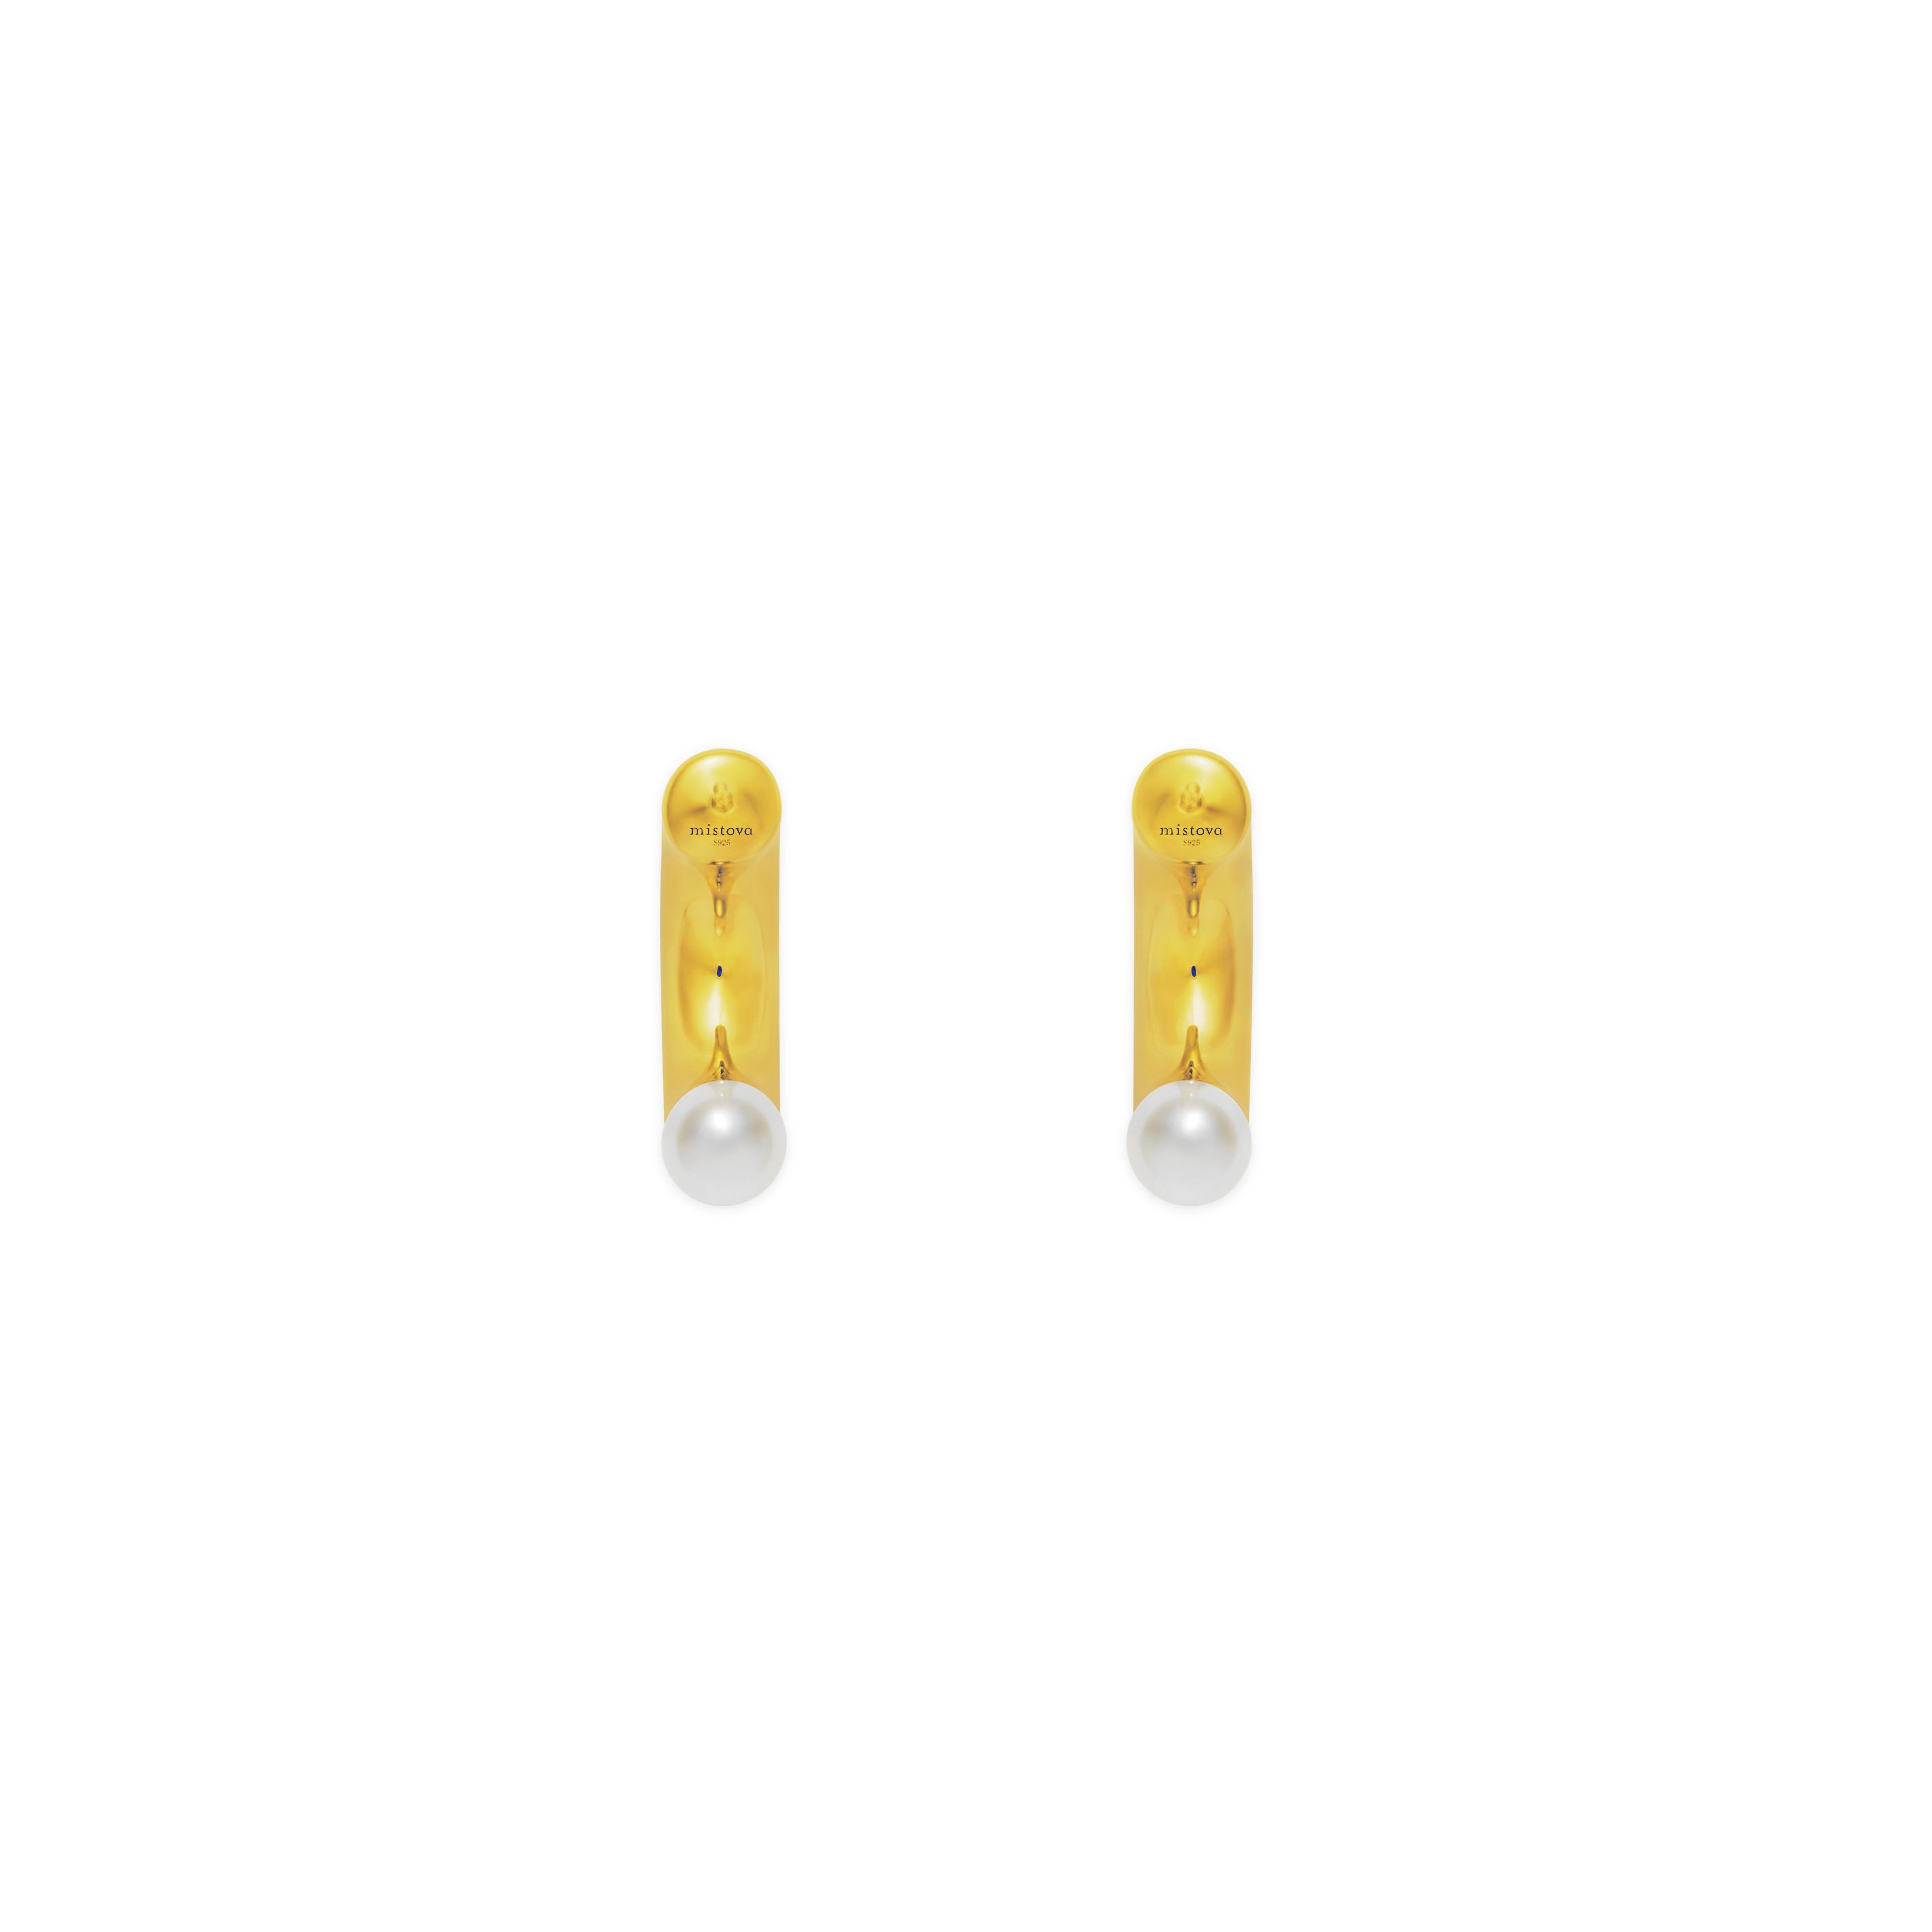 Strong and modern looking Mistova's Anneal earrings are a new take on pearls. A modernist piece of jewelry. Made from a curved hollow tube these earrings are easy to wear. Made from the finest 18K gold and real pearls.